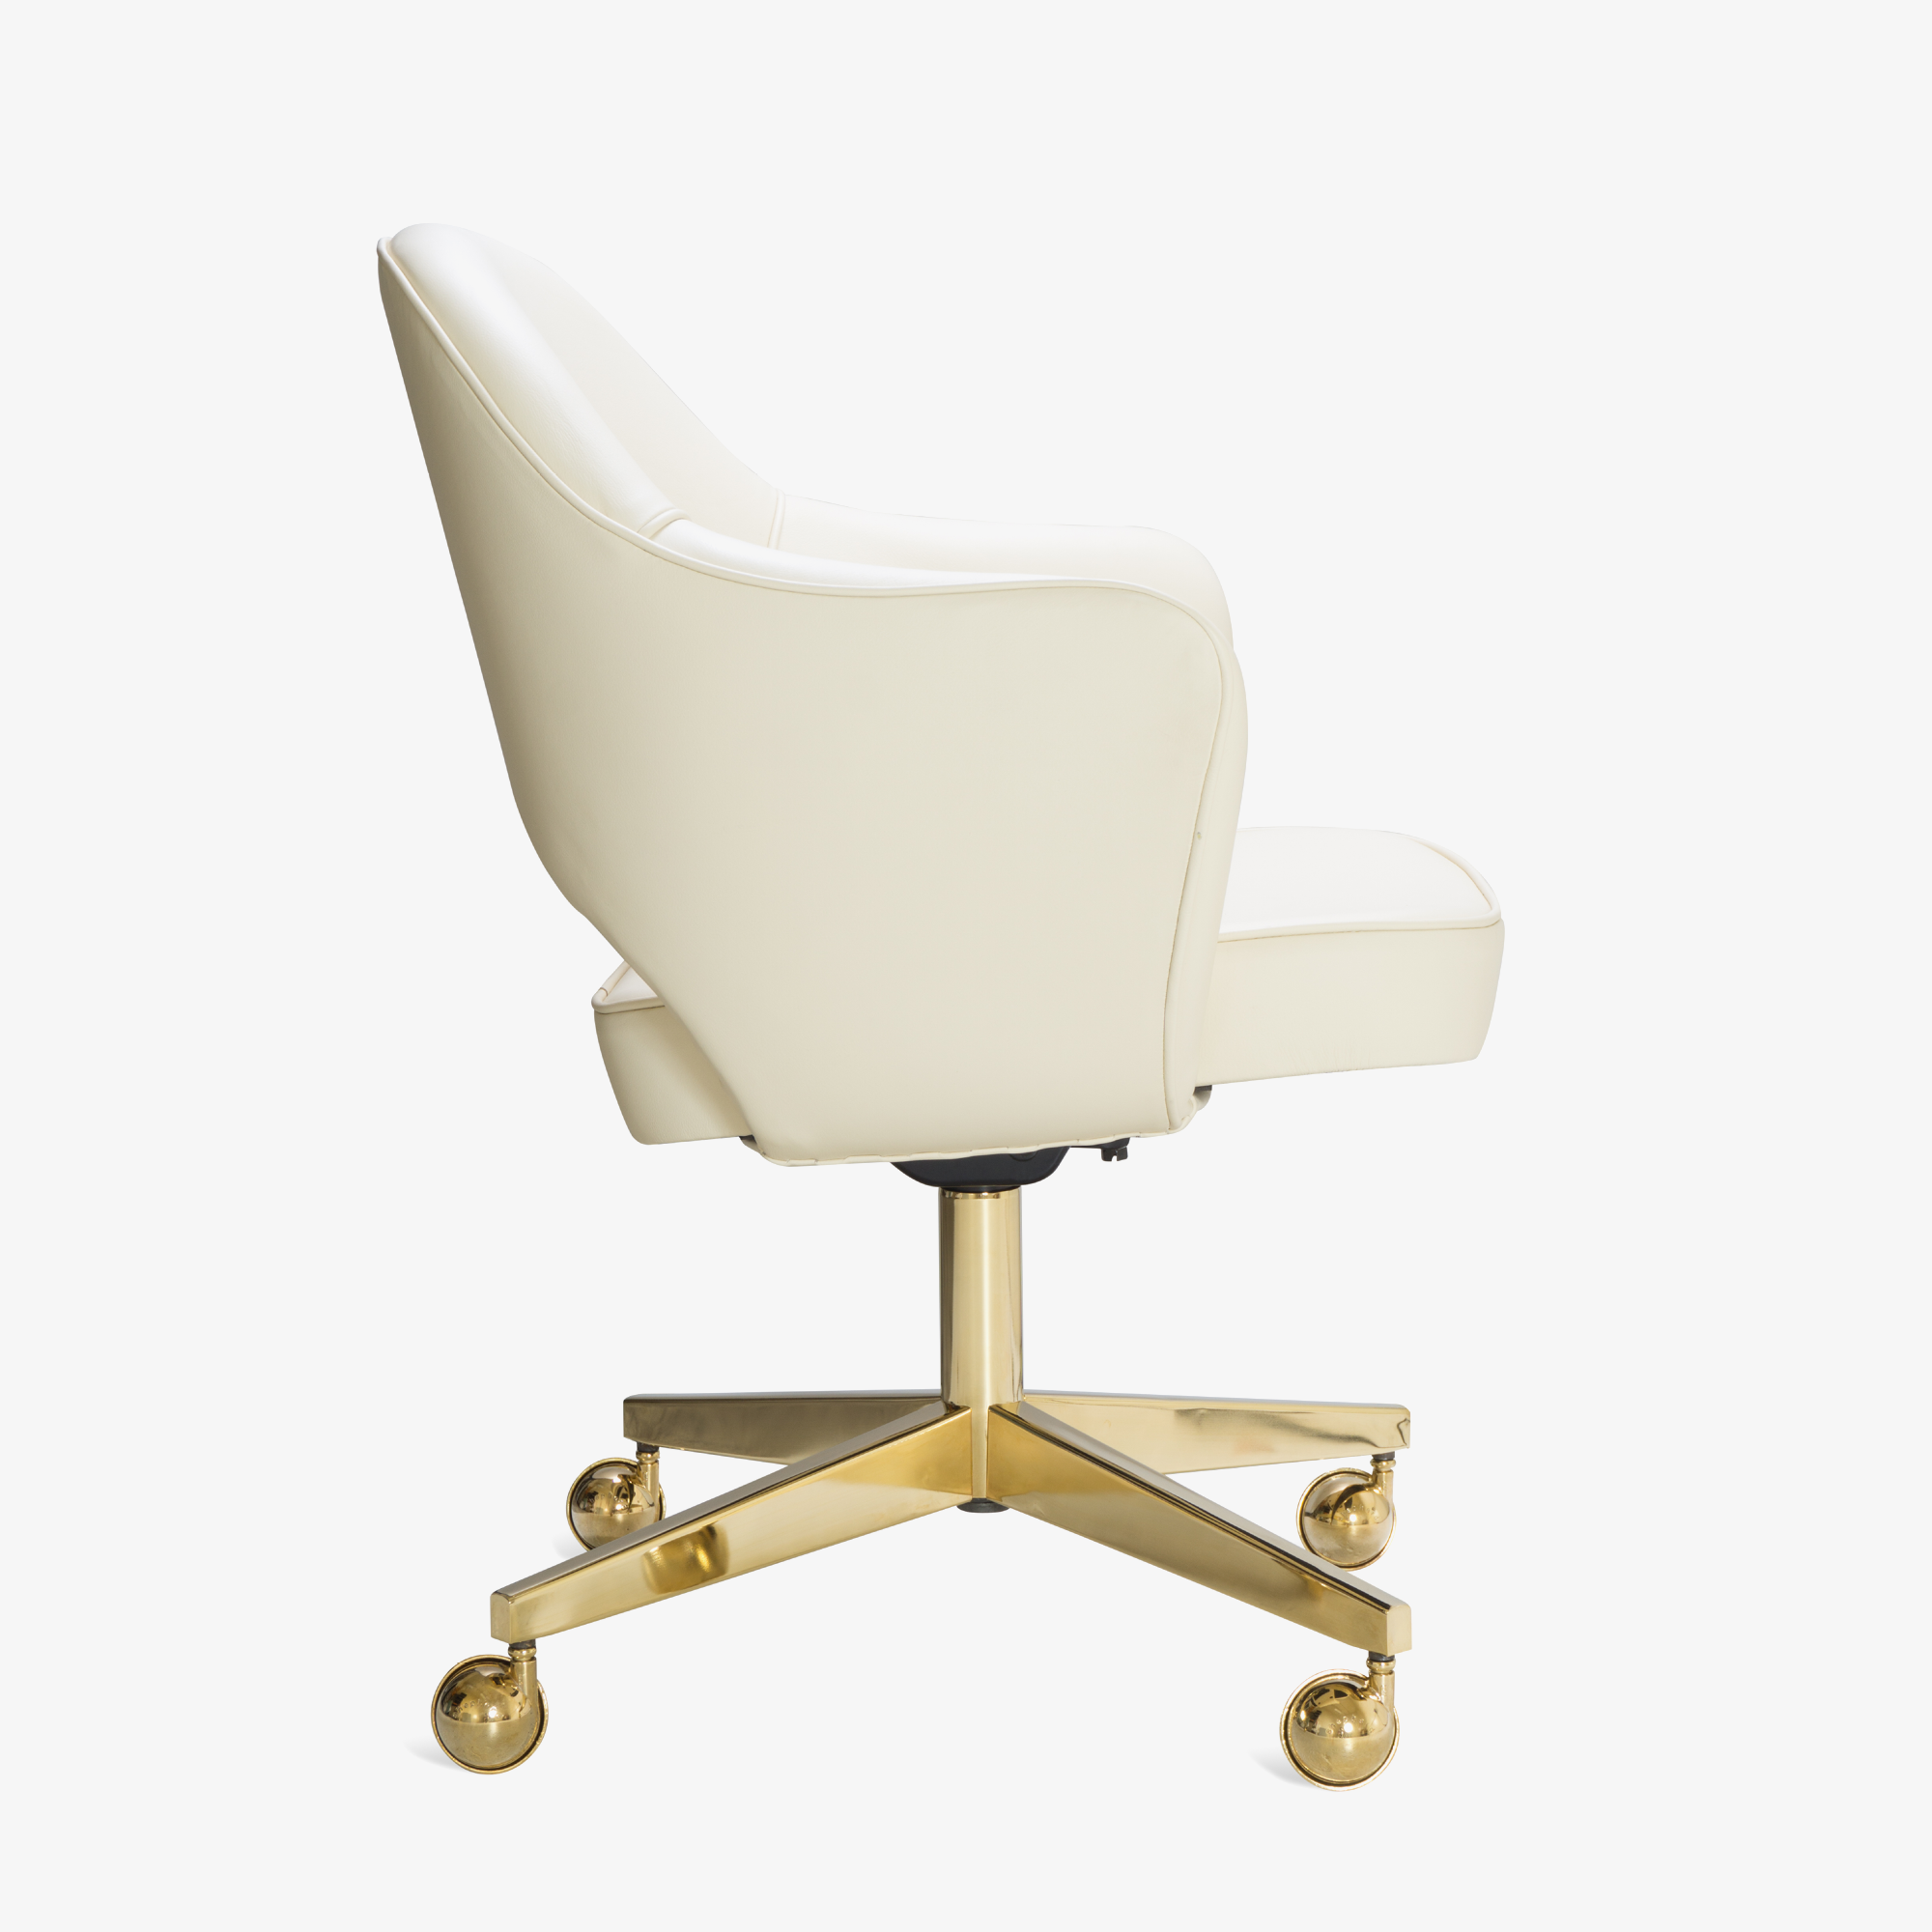 Saarinen Executive Arm Chair in Creme Leather, Swivel Base, 24k Gold Edition3.png